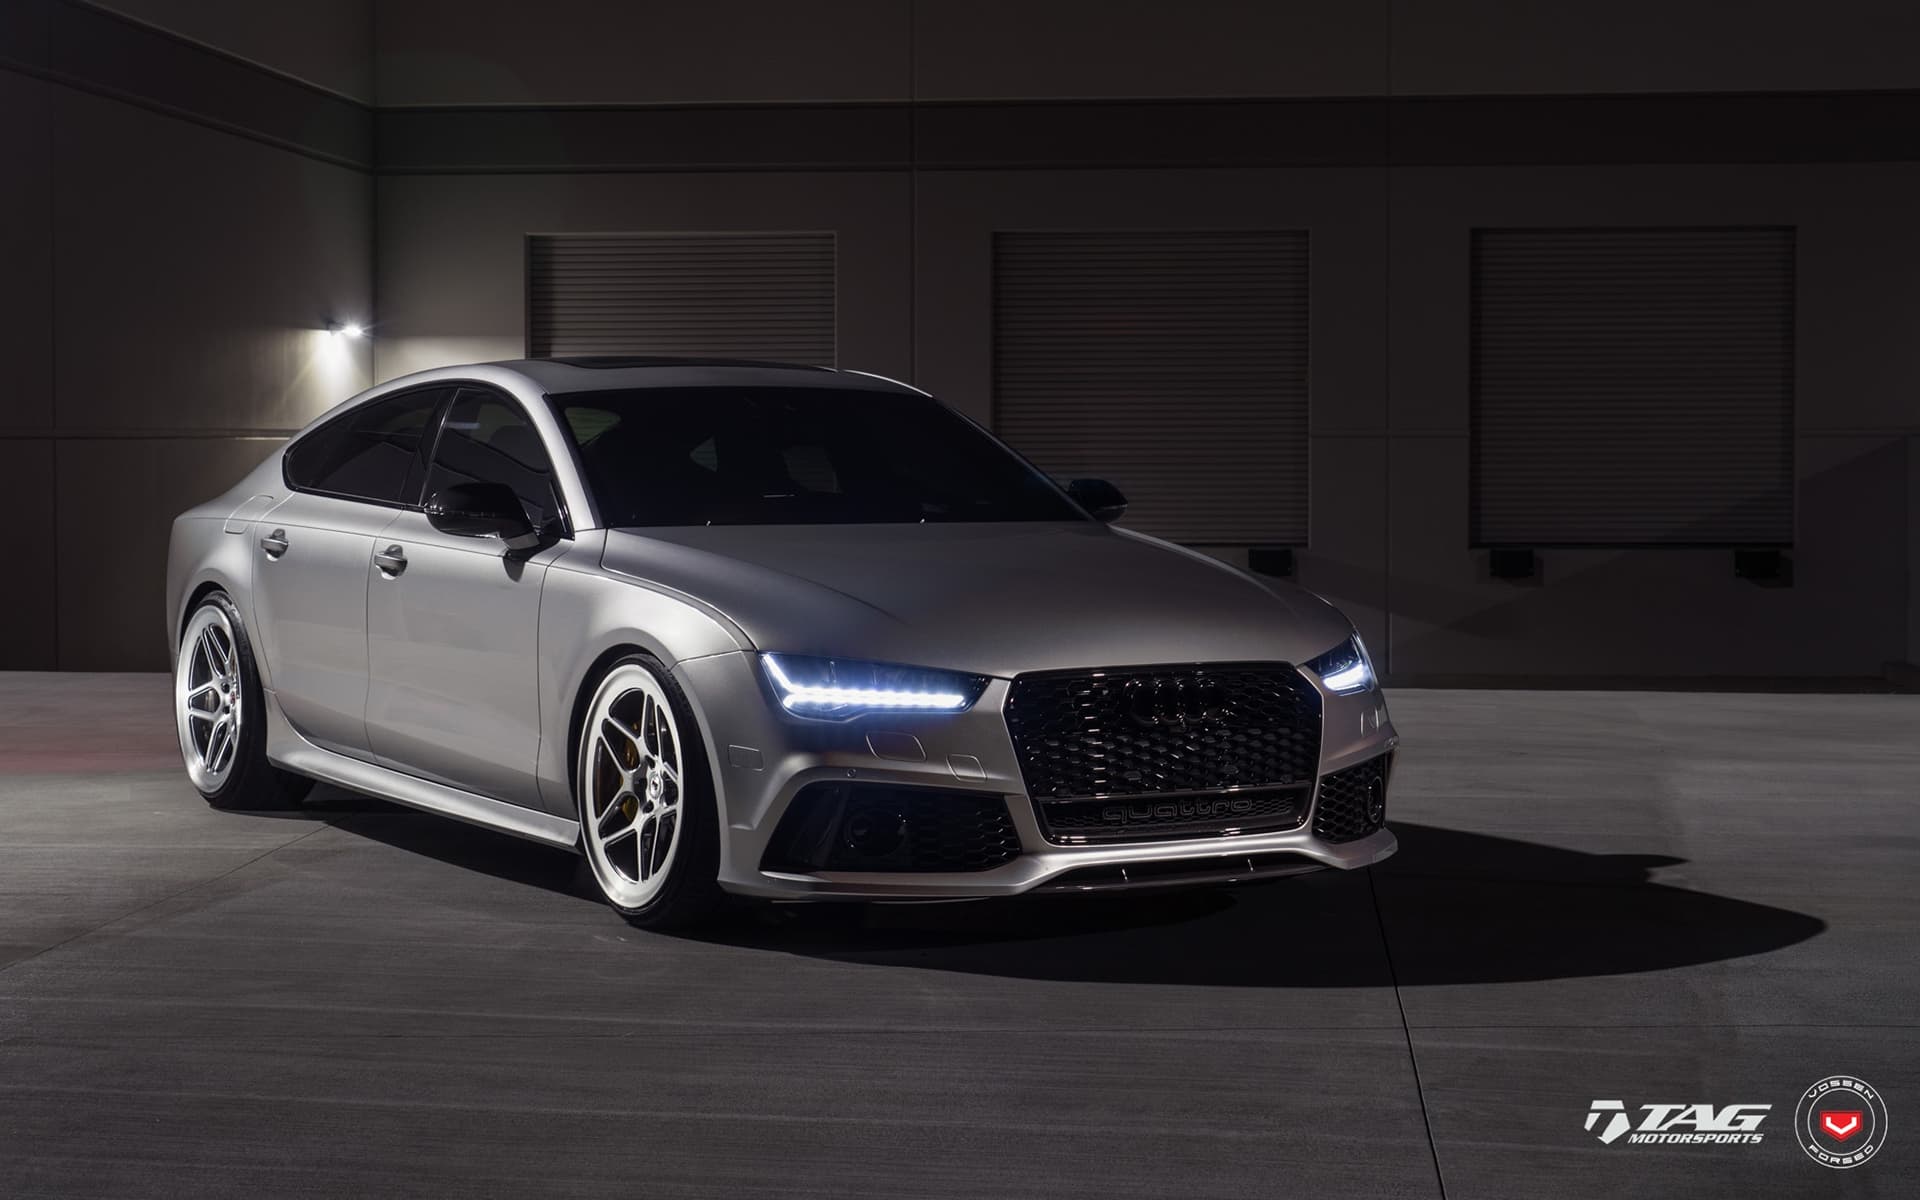 Audi RS wallpapers 2K HIgh Quality Resolution Download